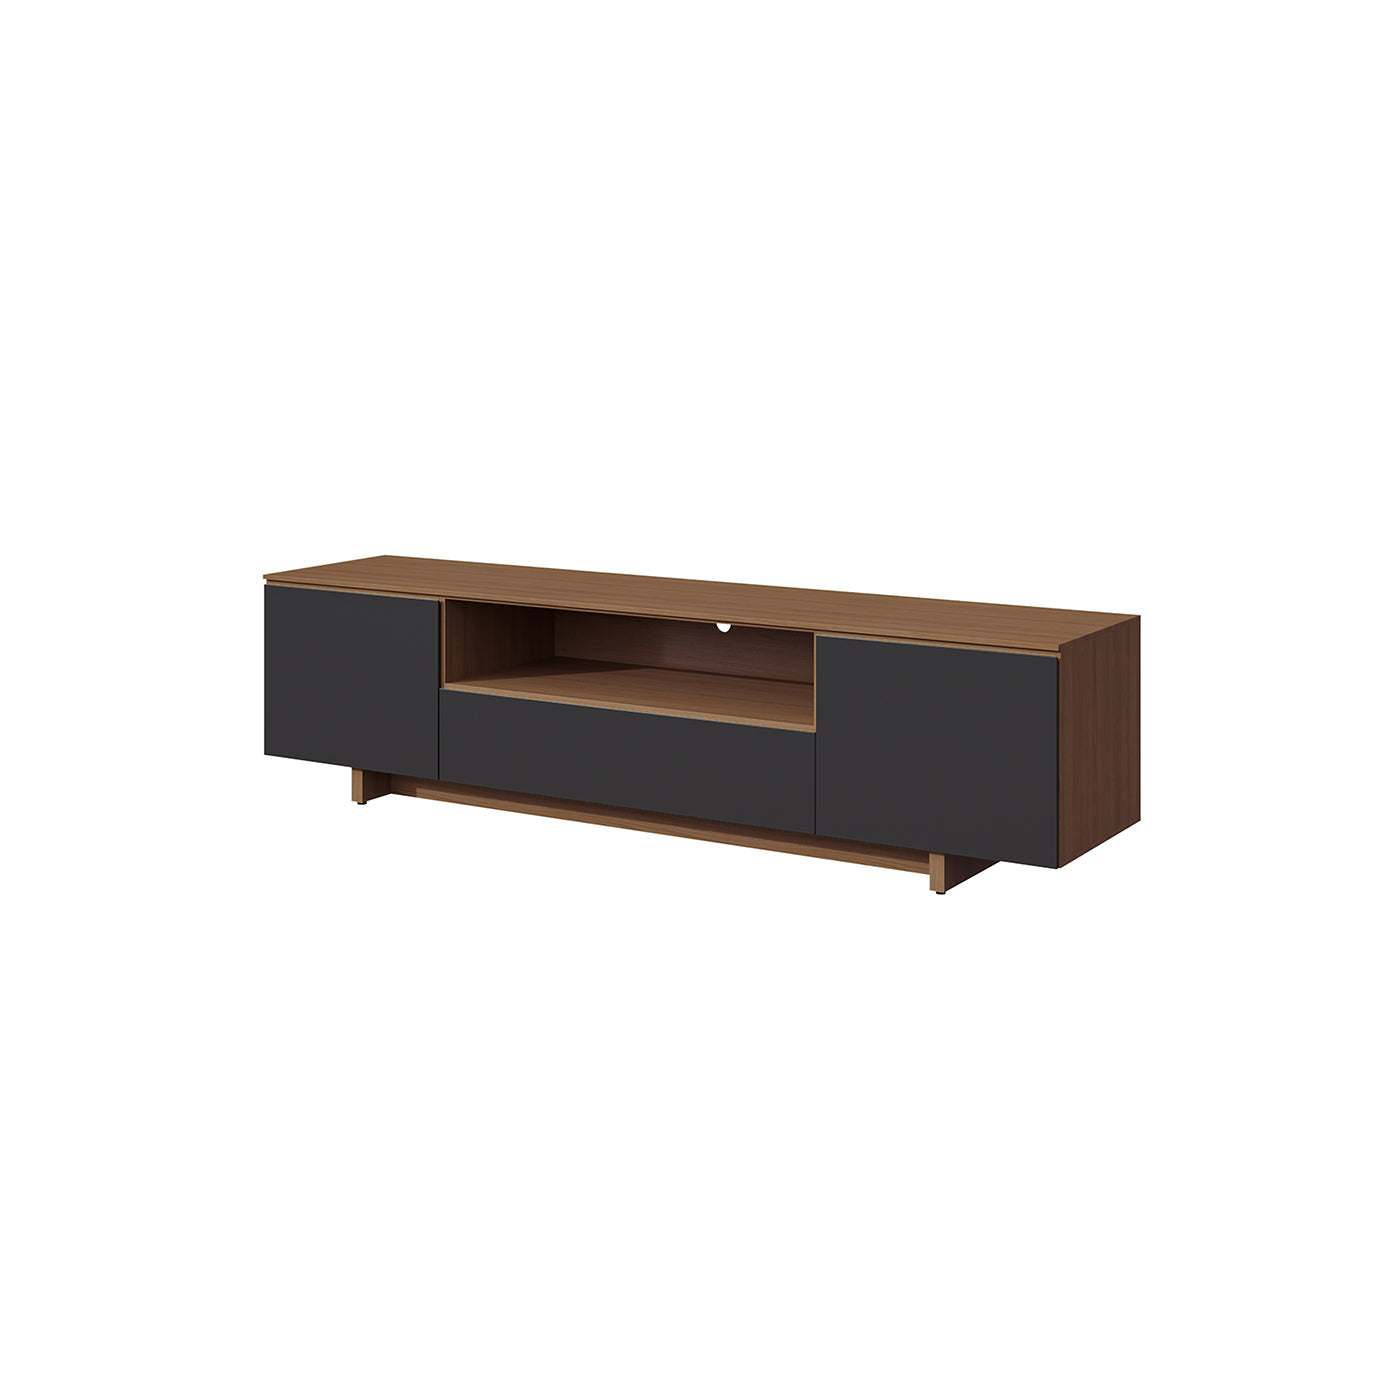 Black Color Modern Walnut Wood TV Stand 70.8 x 15.7 x 18.8 in